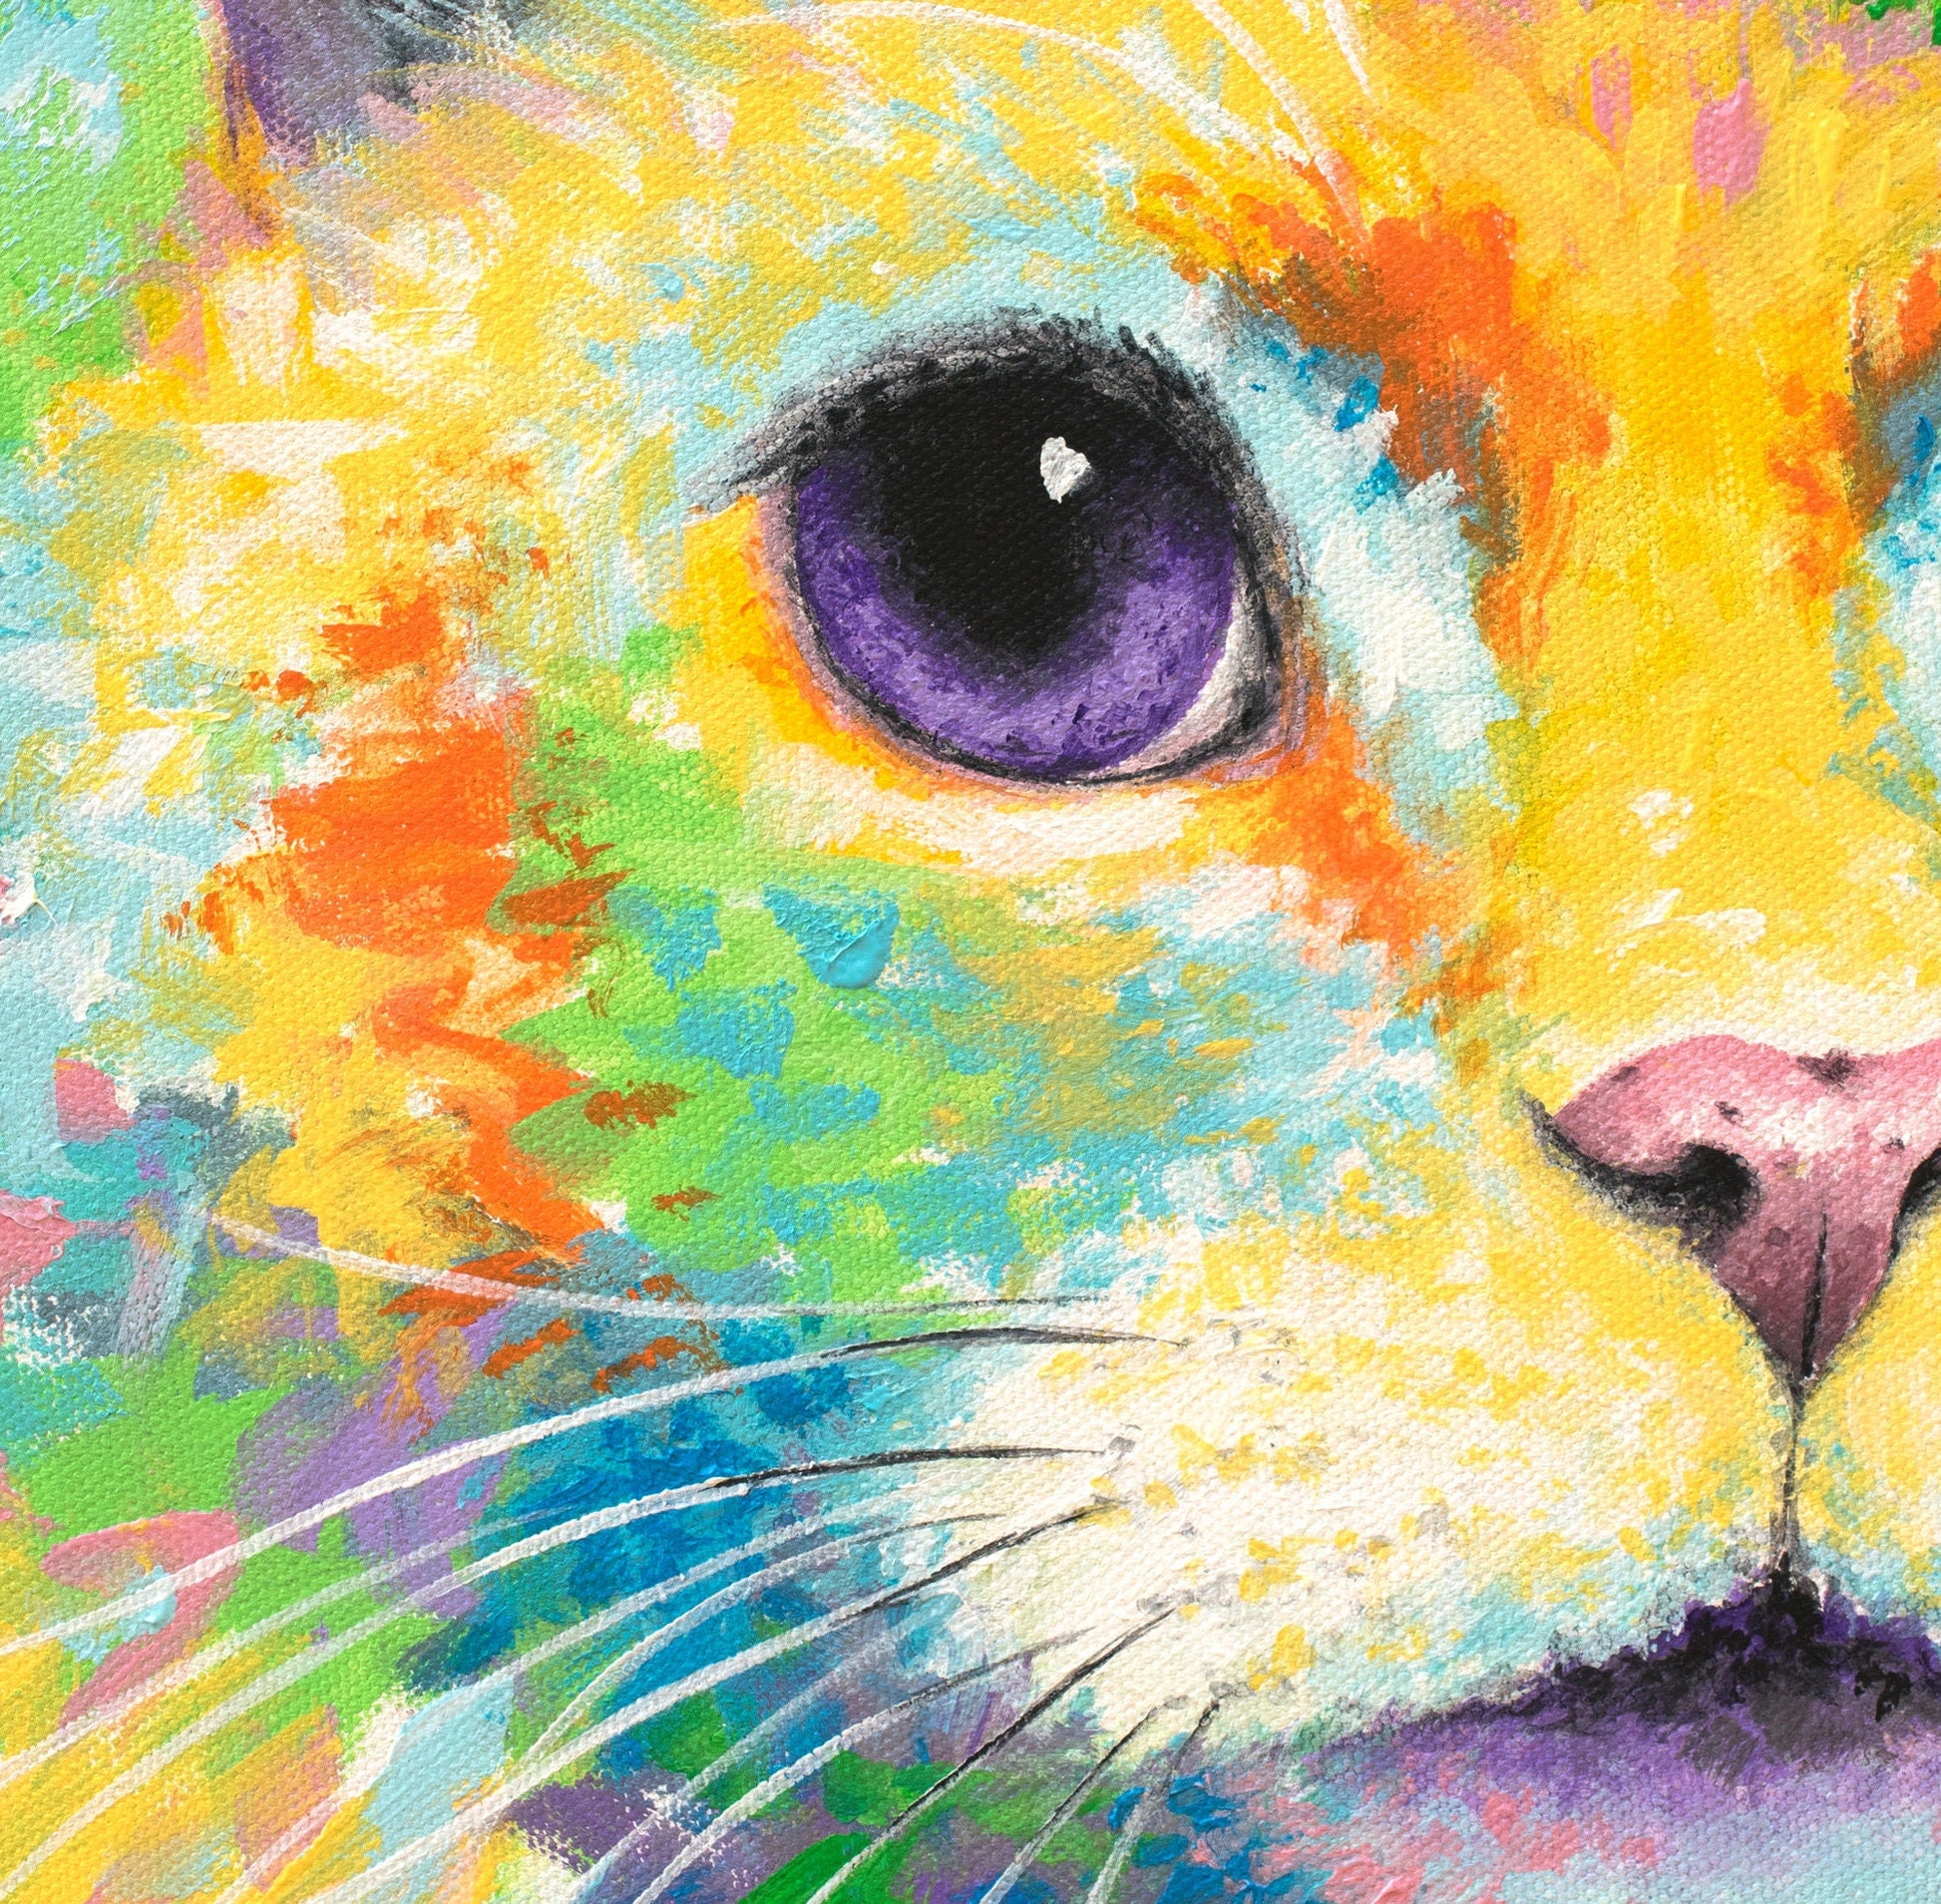 Colorful Cat Art Print on CANVAS or PAPER for Wall Decor or Gifts. Cat Artwork by Krystle Cole